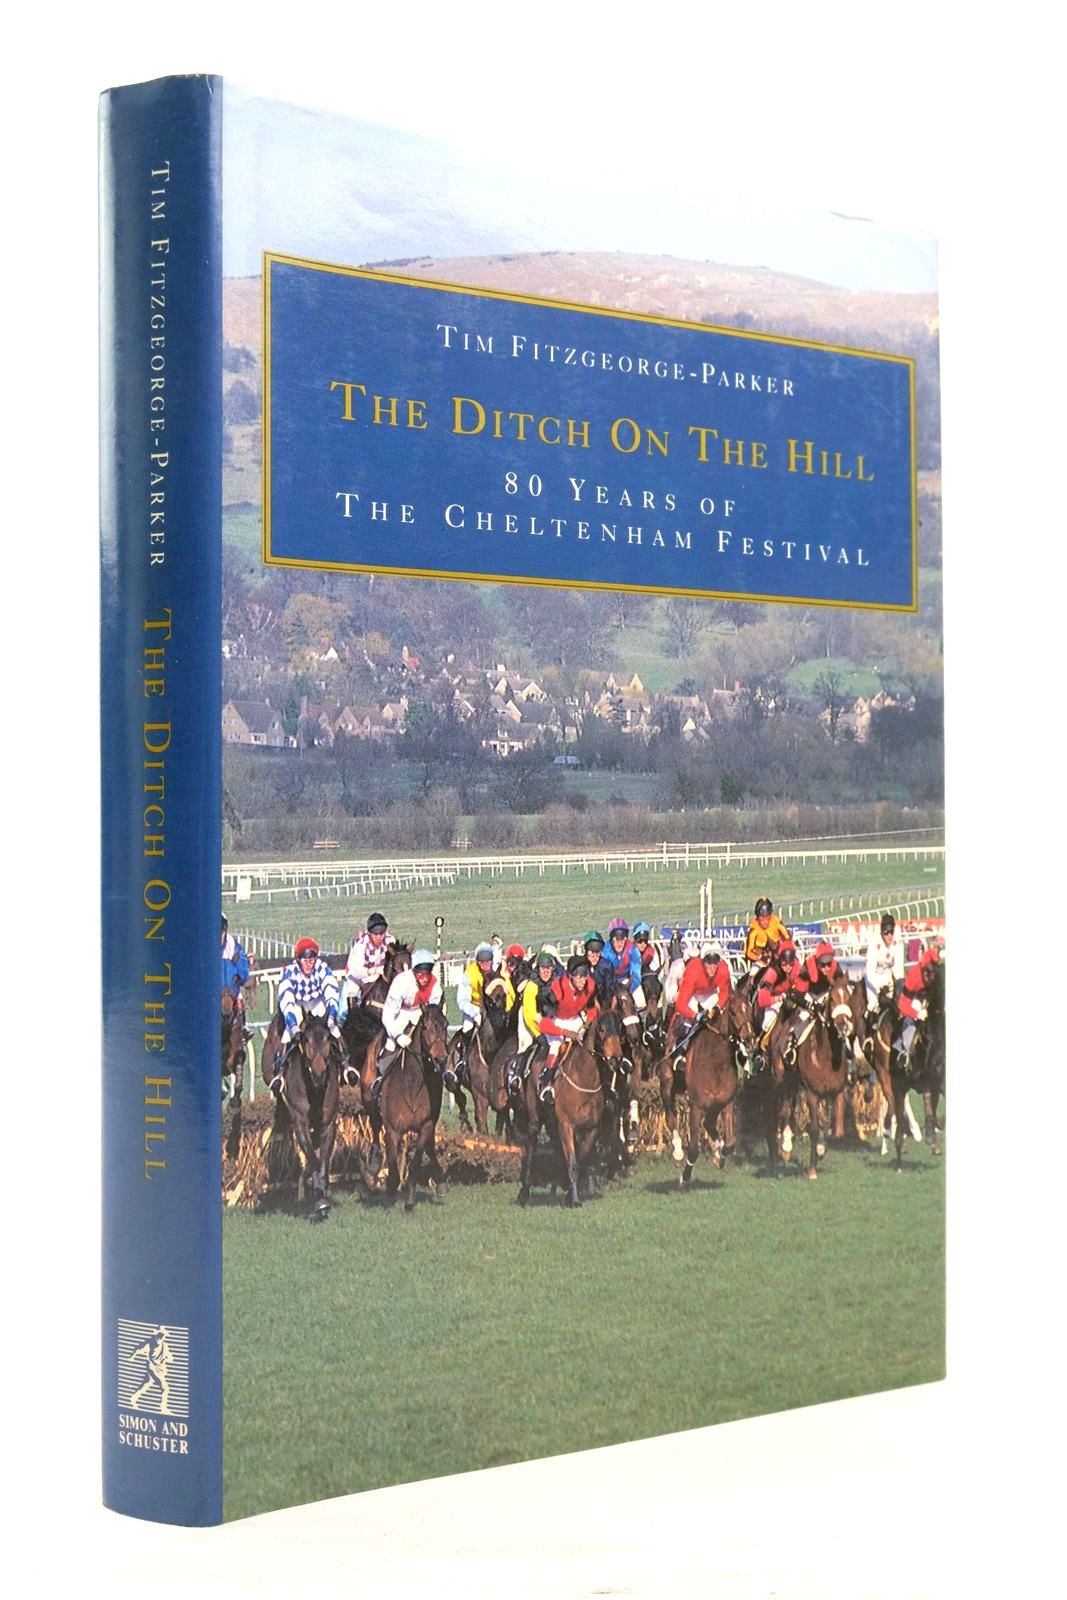 Photo of THE DITCH ON THE HILL: 80 YEARS OF THE CHELTENHAM FESTIVAL- Stock Number: 2137960